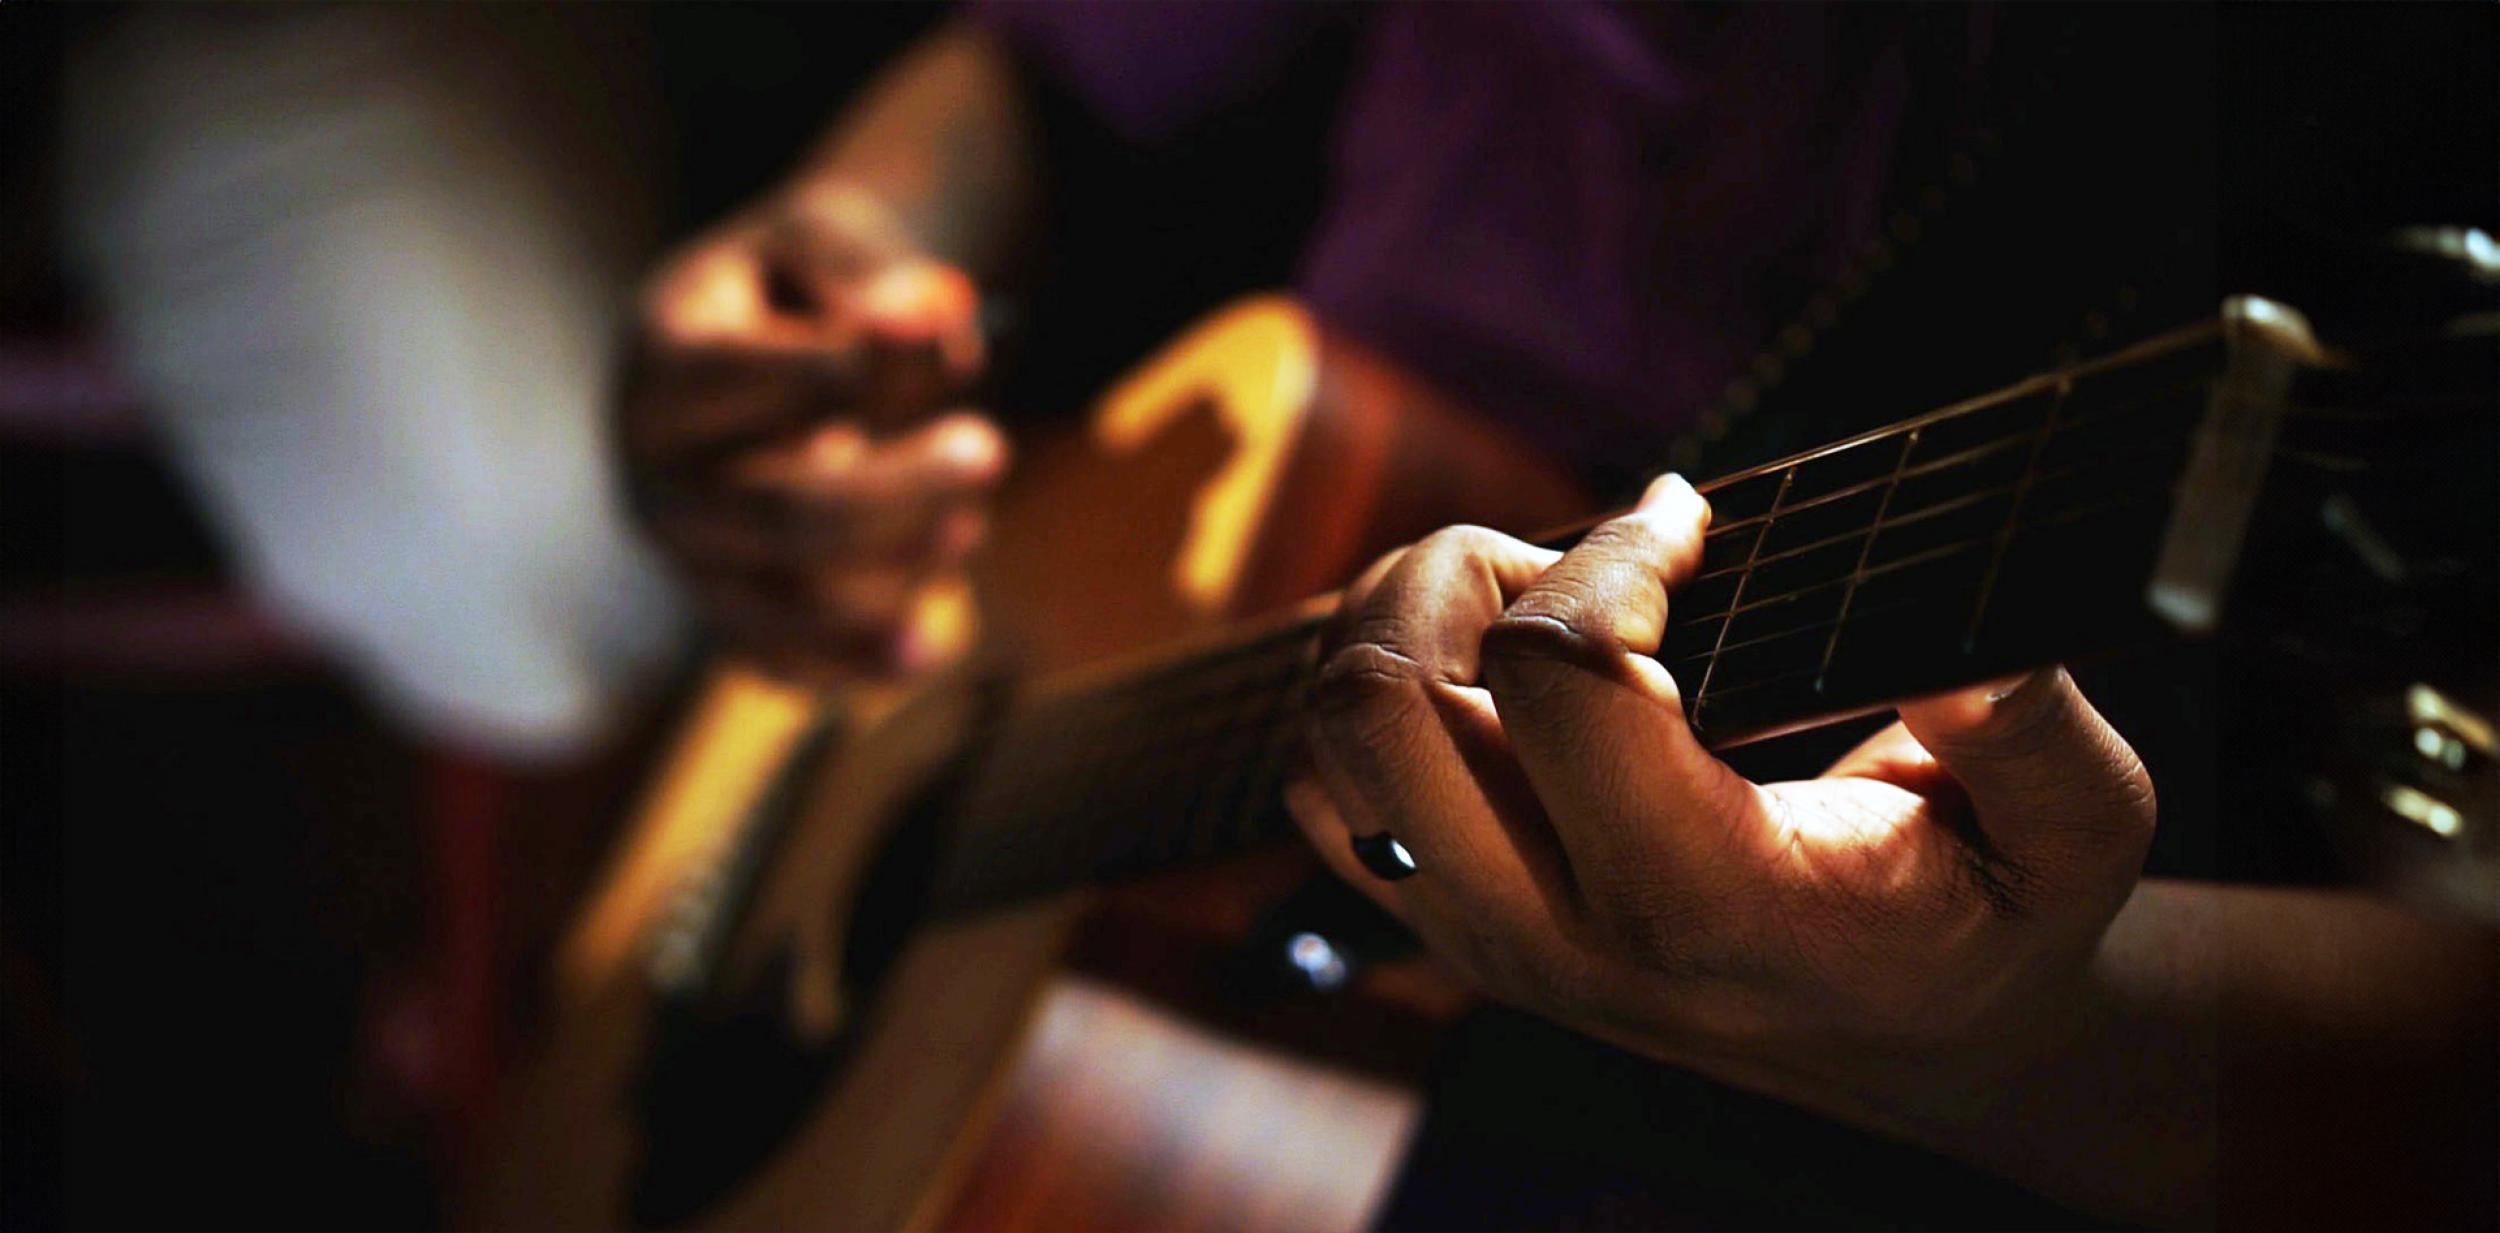 Closeup of someone playing an acoustic guitar